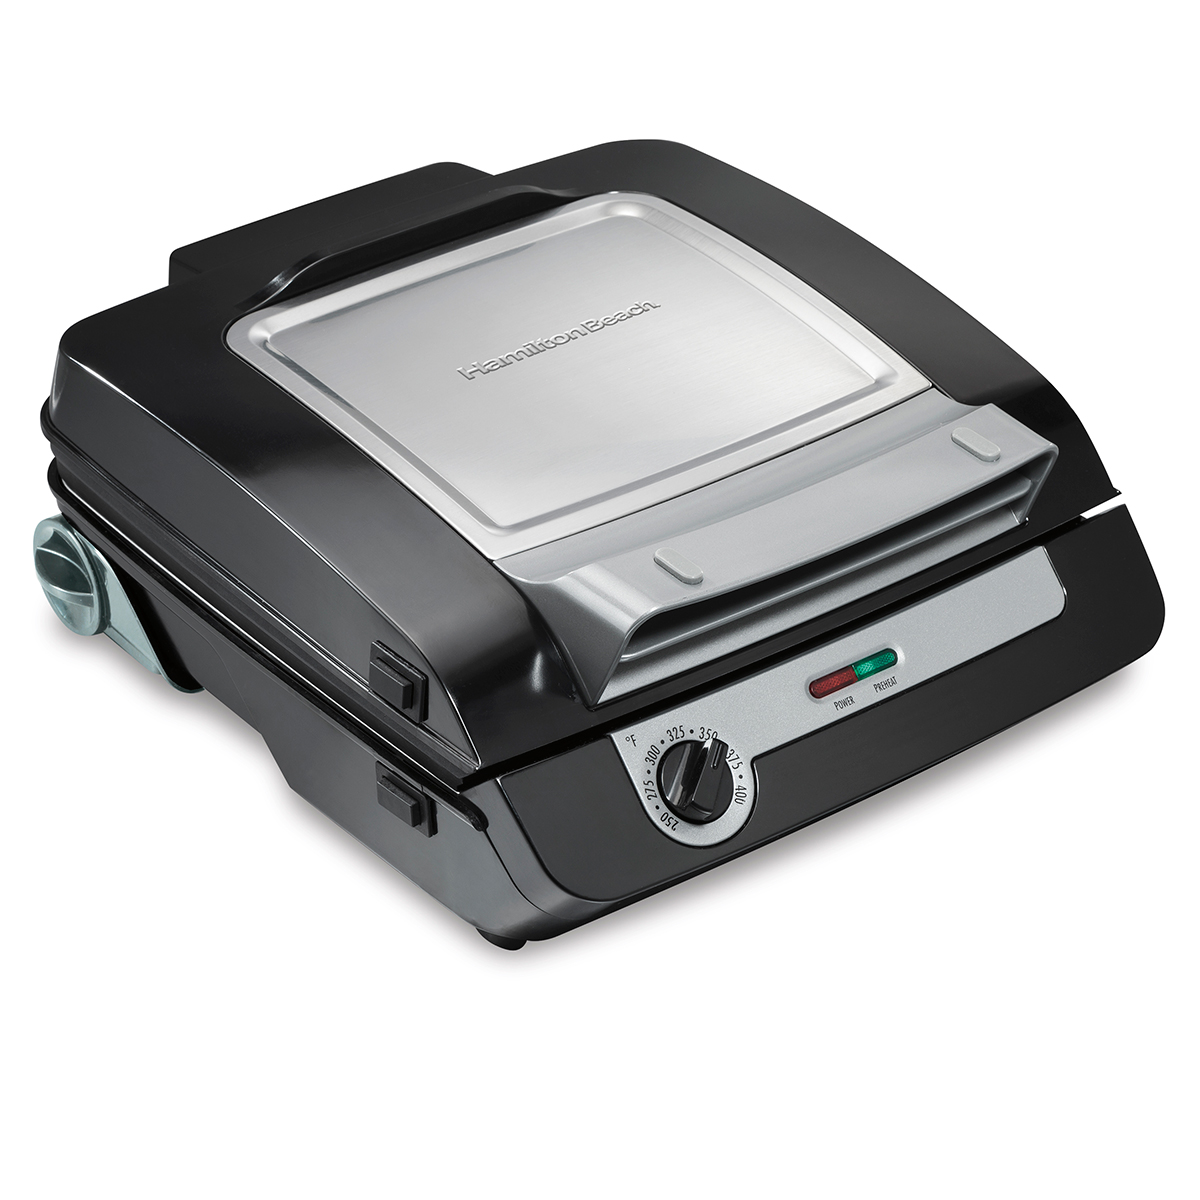 Opened Box Hamilton Beach 3-in-1 MultiGrill Indoor Grill, Griddle Bacon Cooker